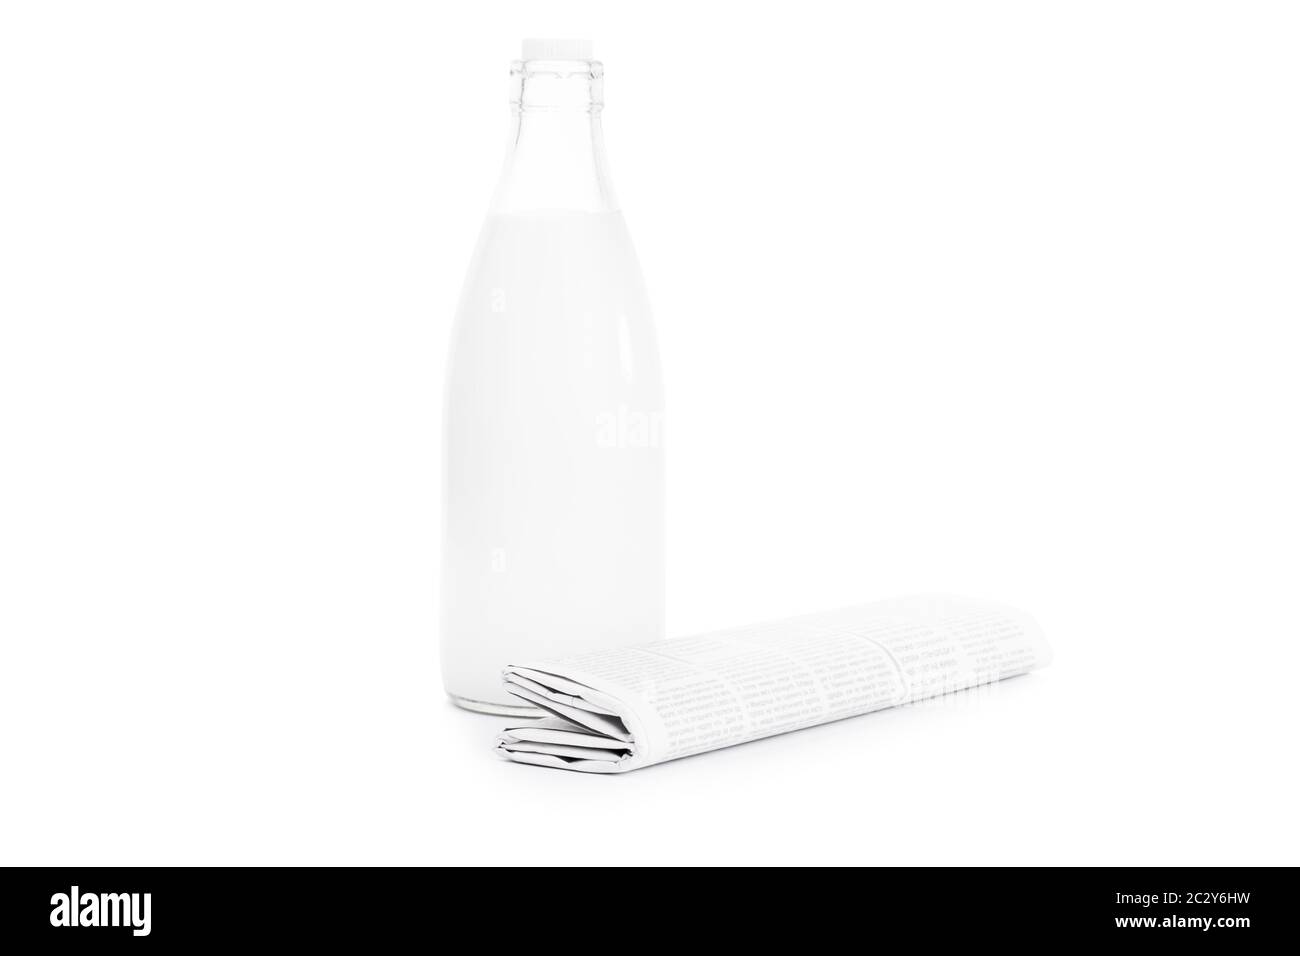 Close up shot of a rolled up newspaper and an old school bottle of milk, isolated on white background. Stock Photo